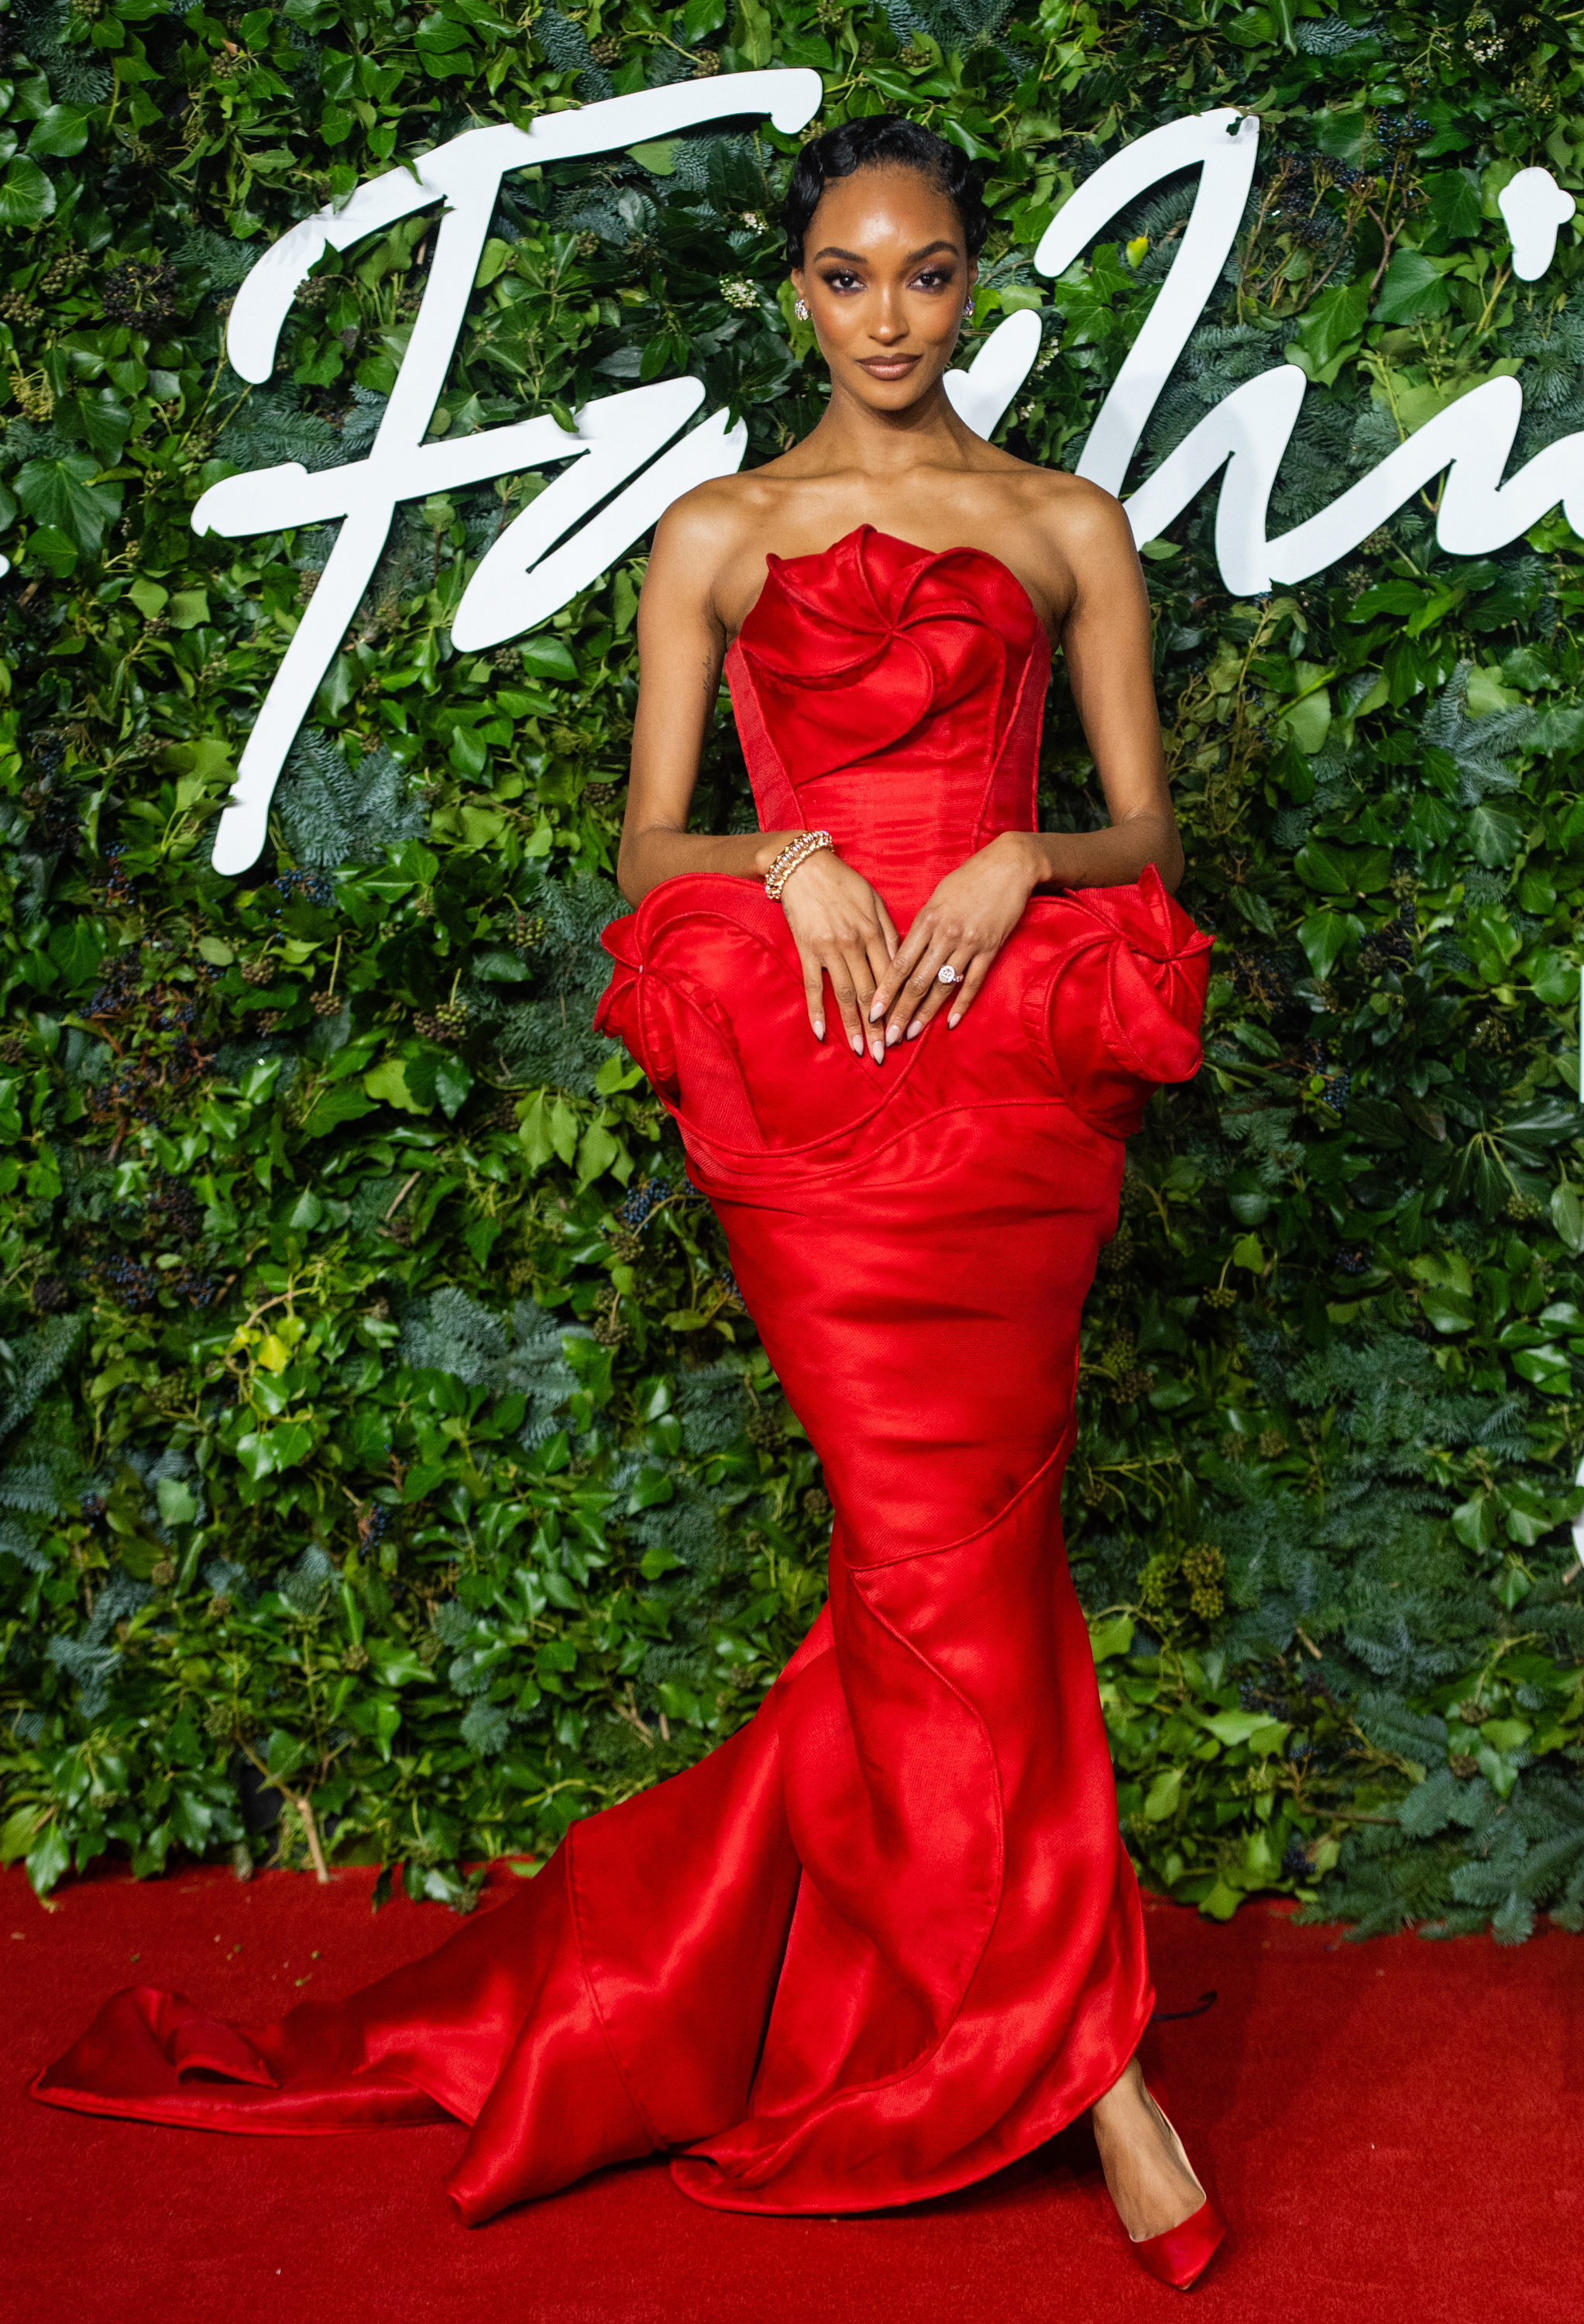 Jourdan Dunn at The Fashion Awards 2021 on November 29, 2021, in London. | Source: Getty Images